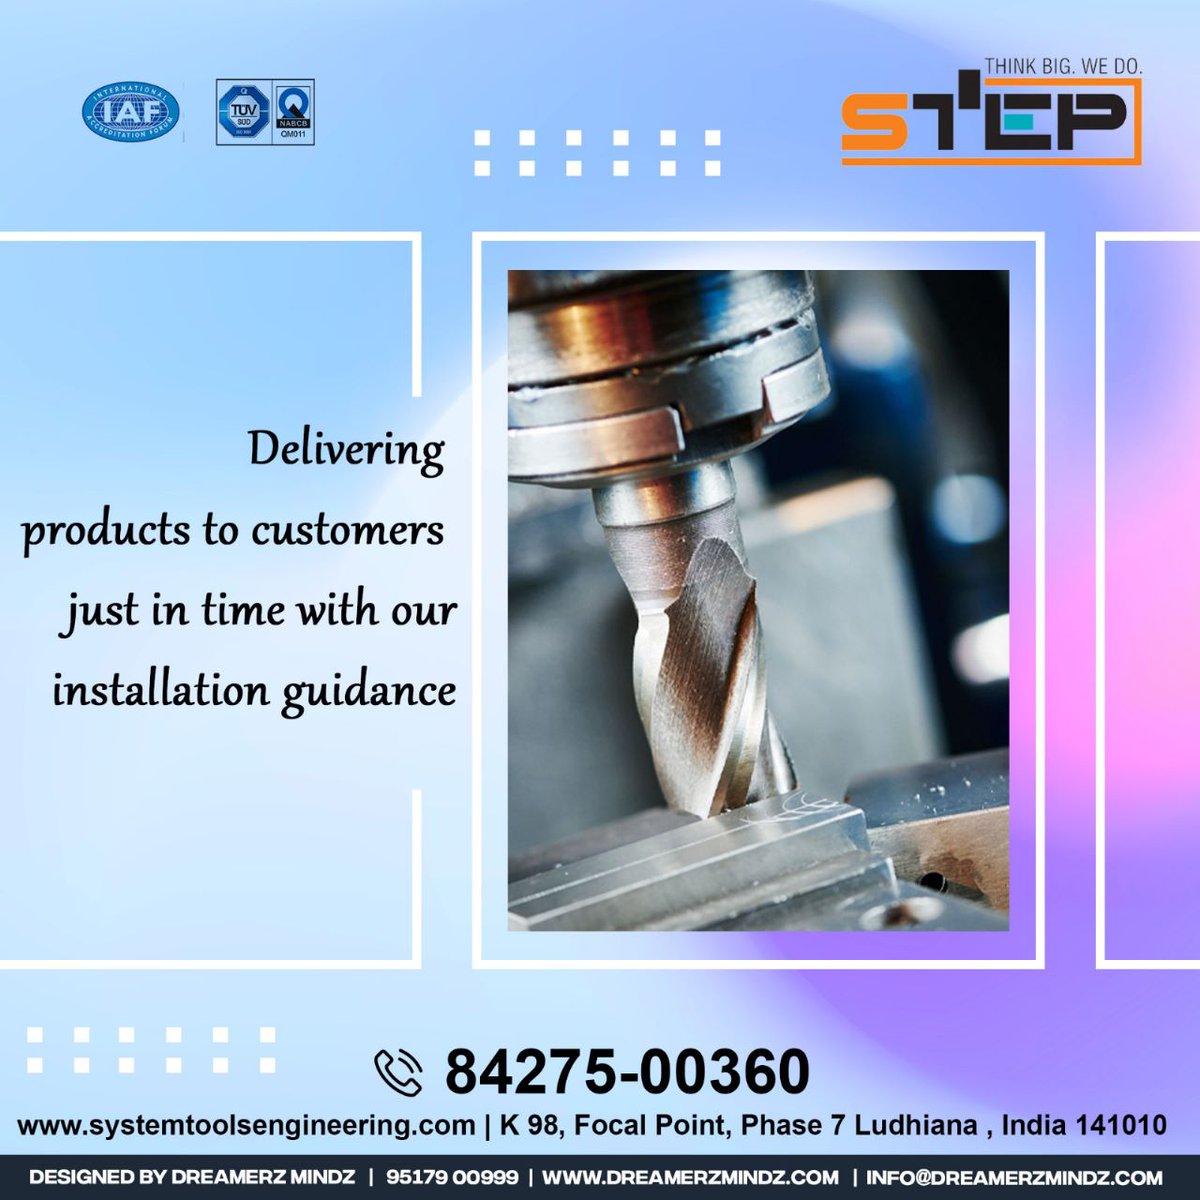 Delivering products to customers just in time with our installation guide.
Ring us at 84275-00360
#step #systemtoolsandengineeringproducts #systemtools #machineparts #tractorparts #jcb #culturemachineparts #engineeringproducts #industrialparts #automationparts #machiningparts